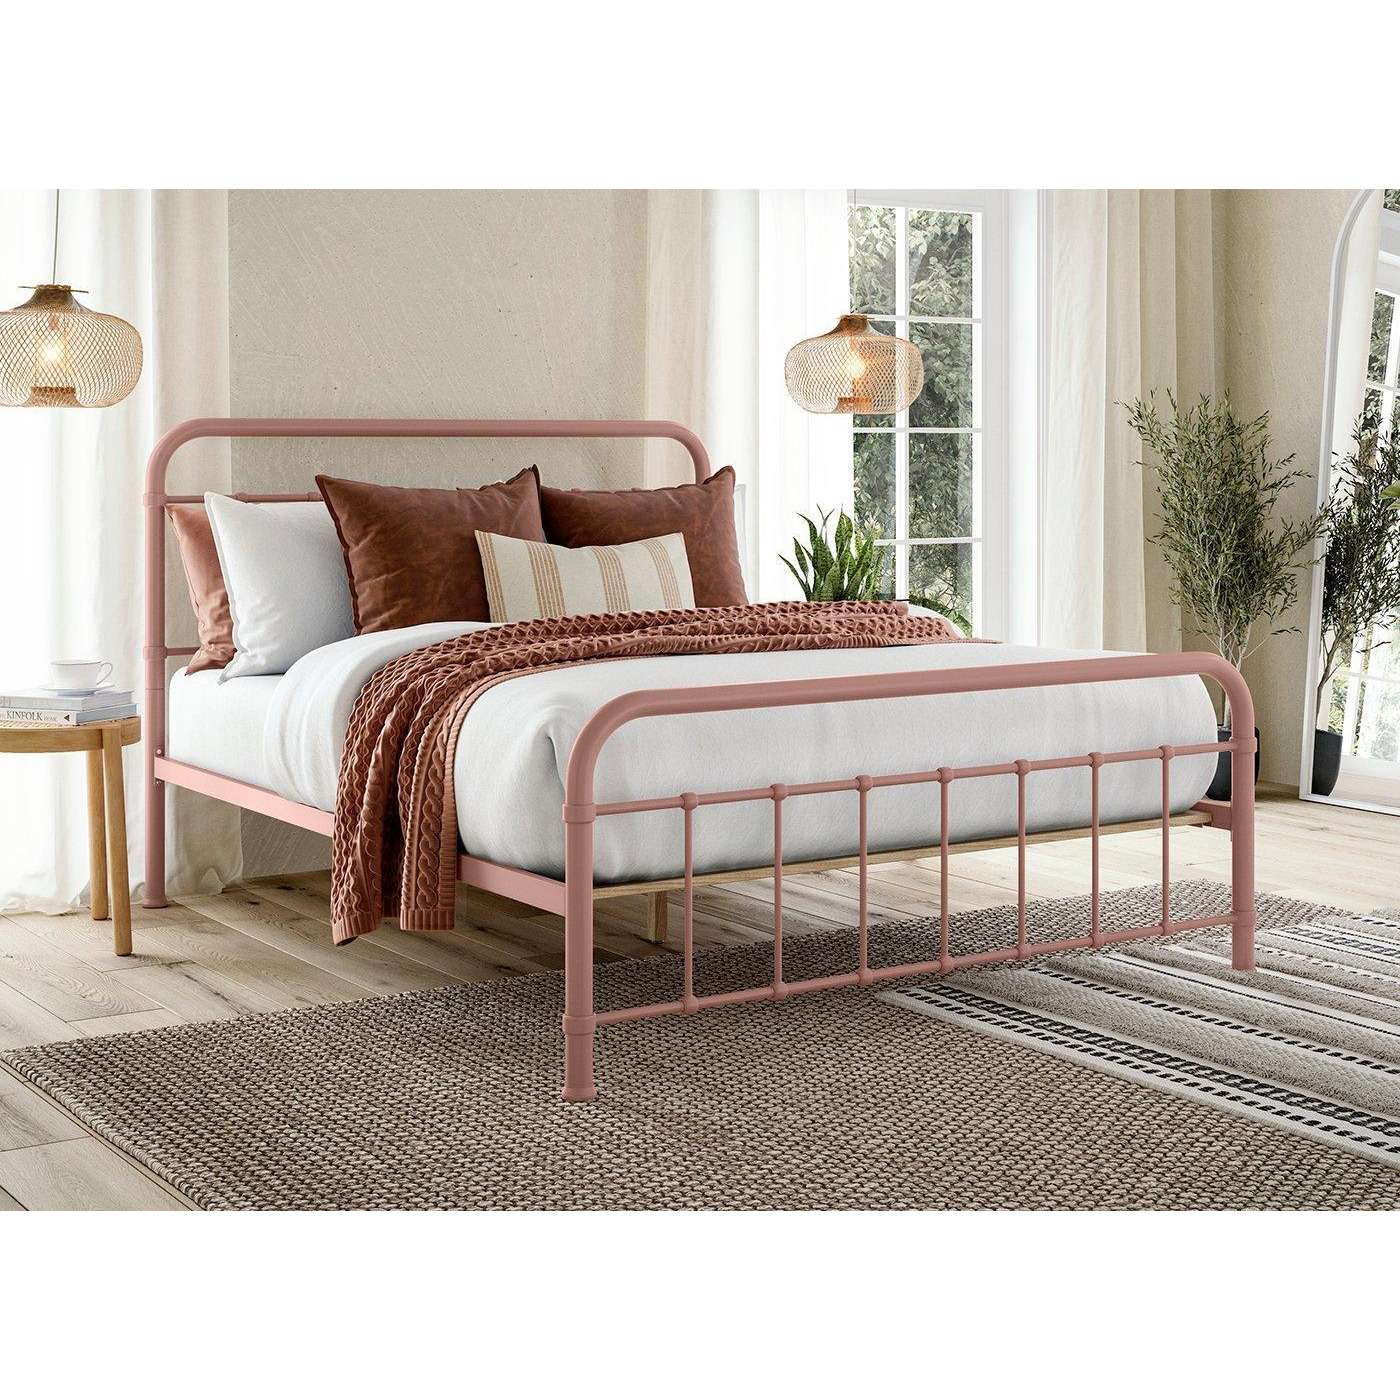 Abbey Metal Bed Frame - 5'0 King - Pink